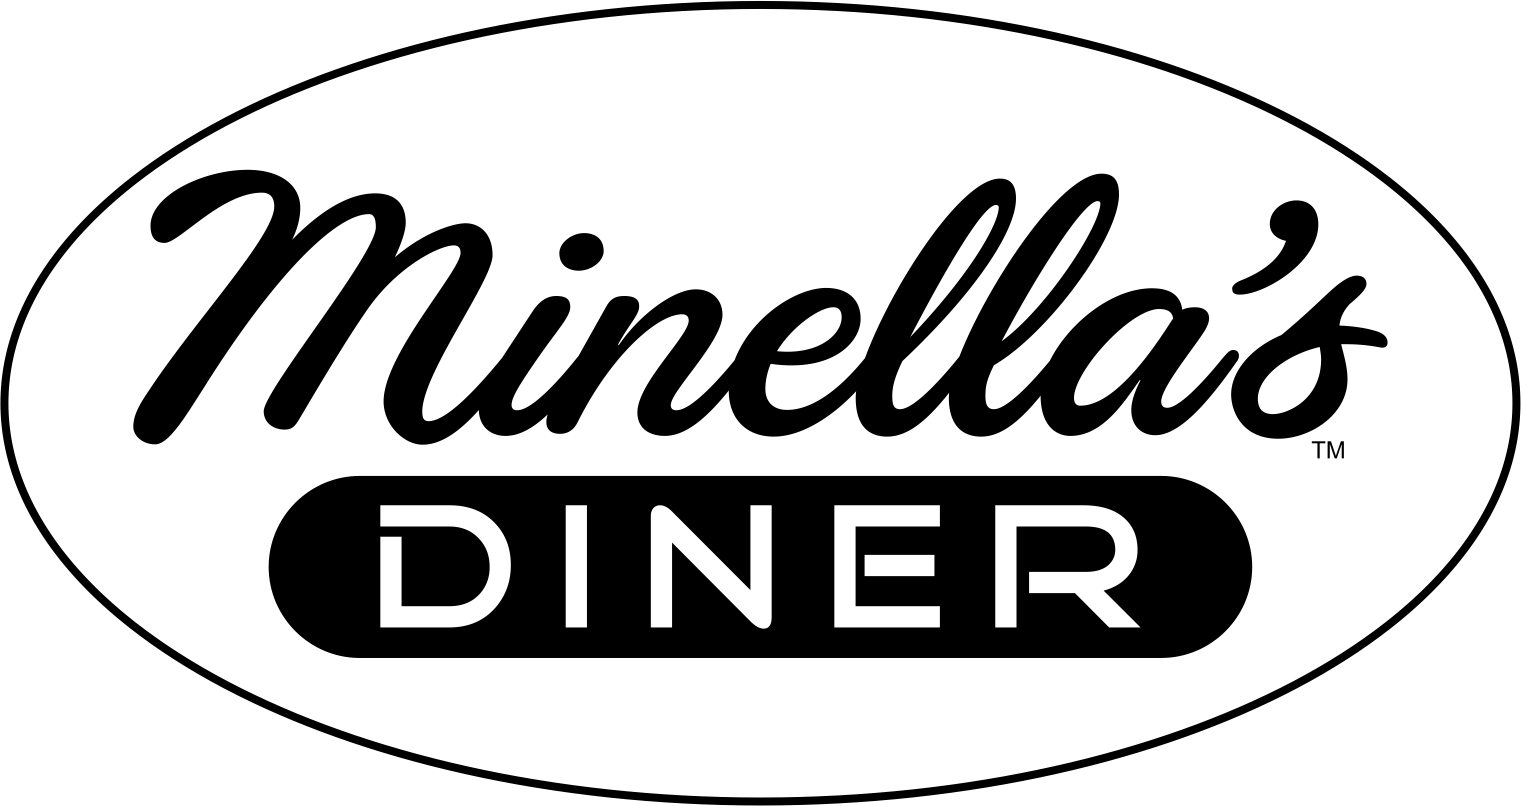 Home - The Diner